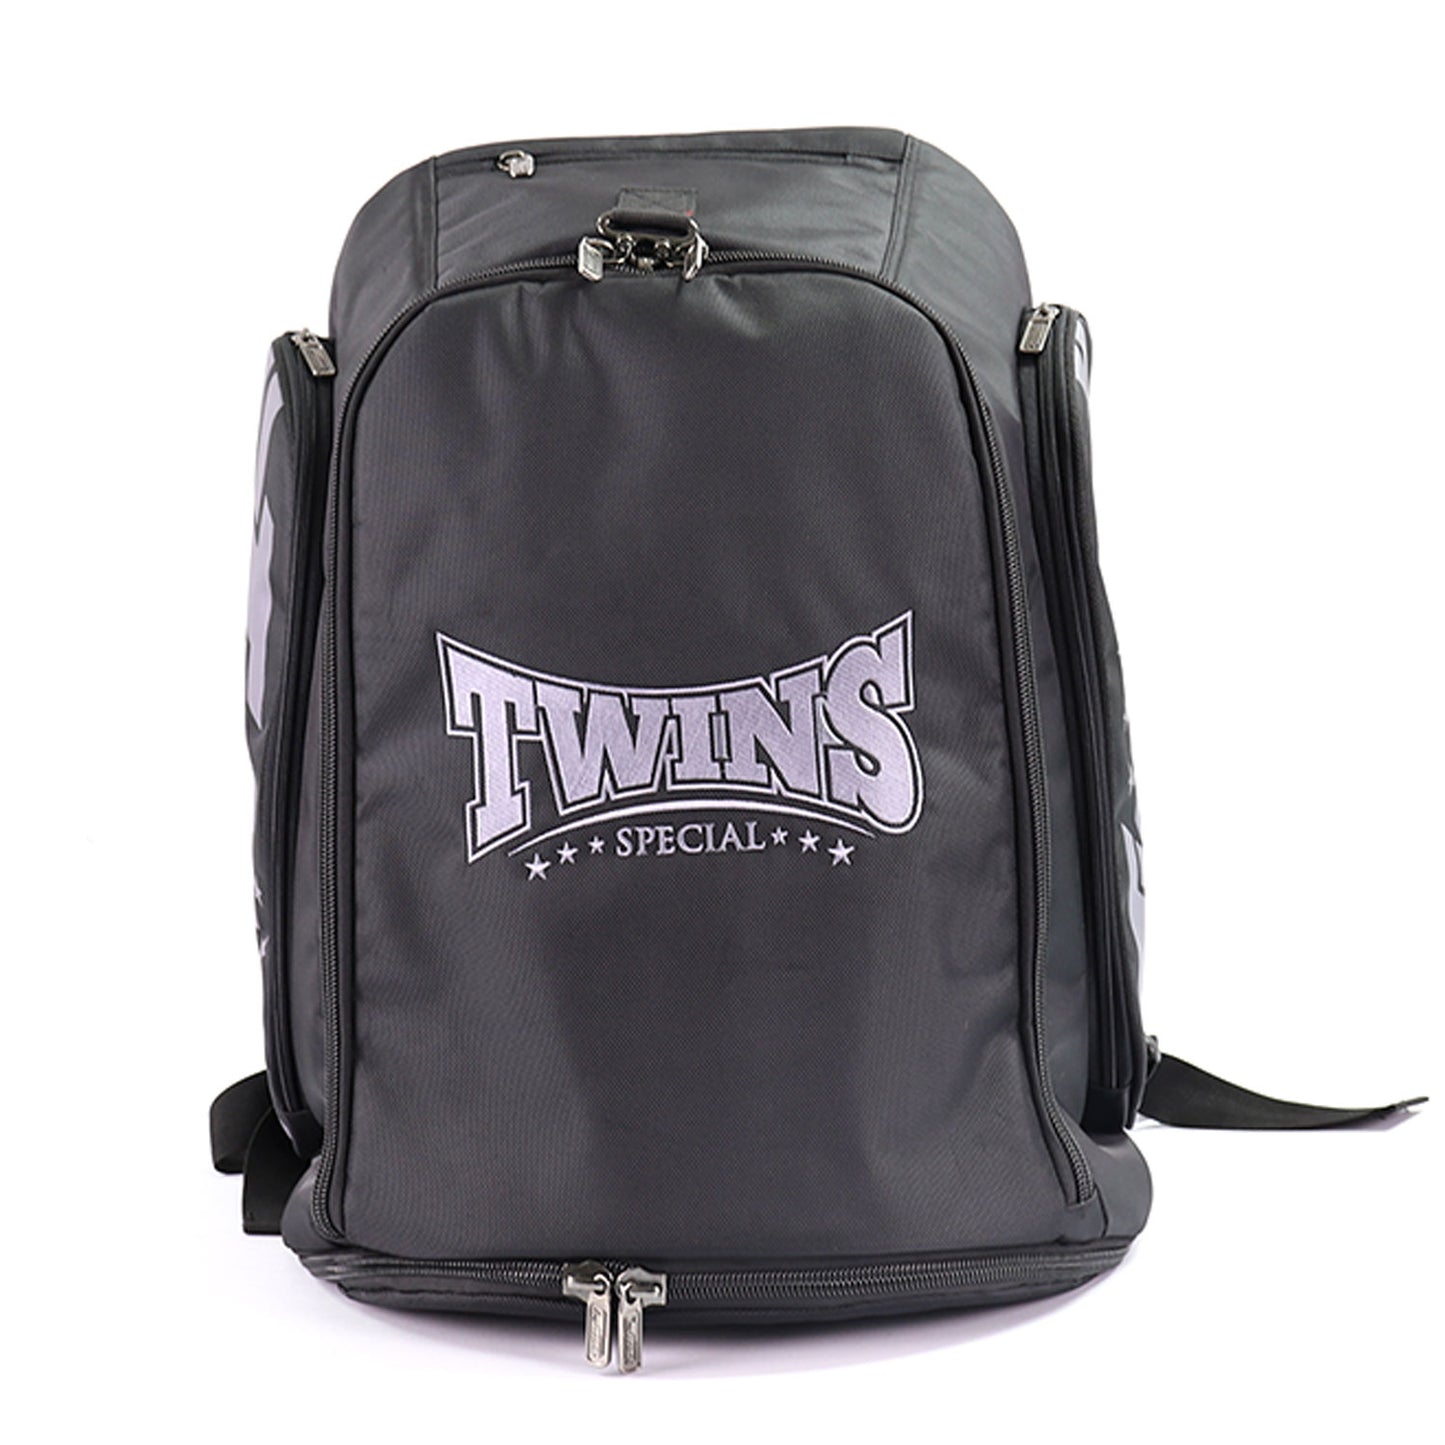 TWINS SPECIAL Twins Convertible Rucksack Bag